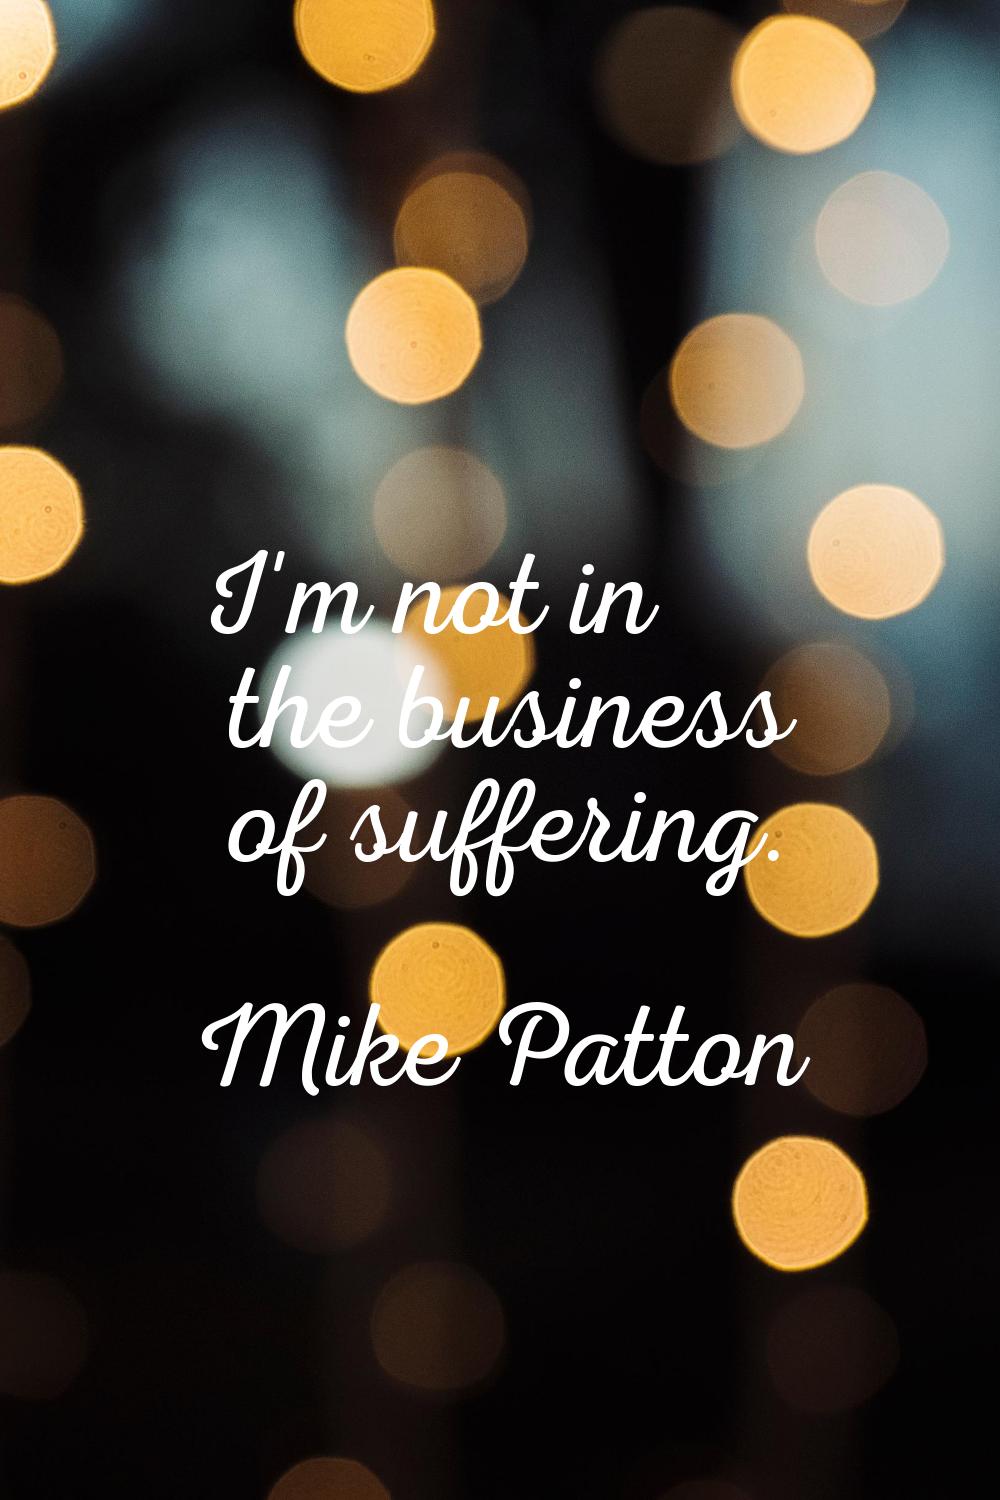 I'm not in the business of suffering.